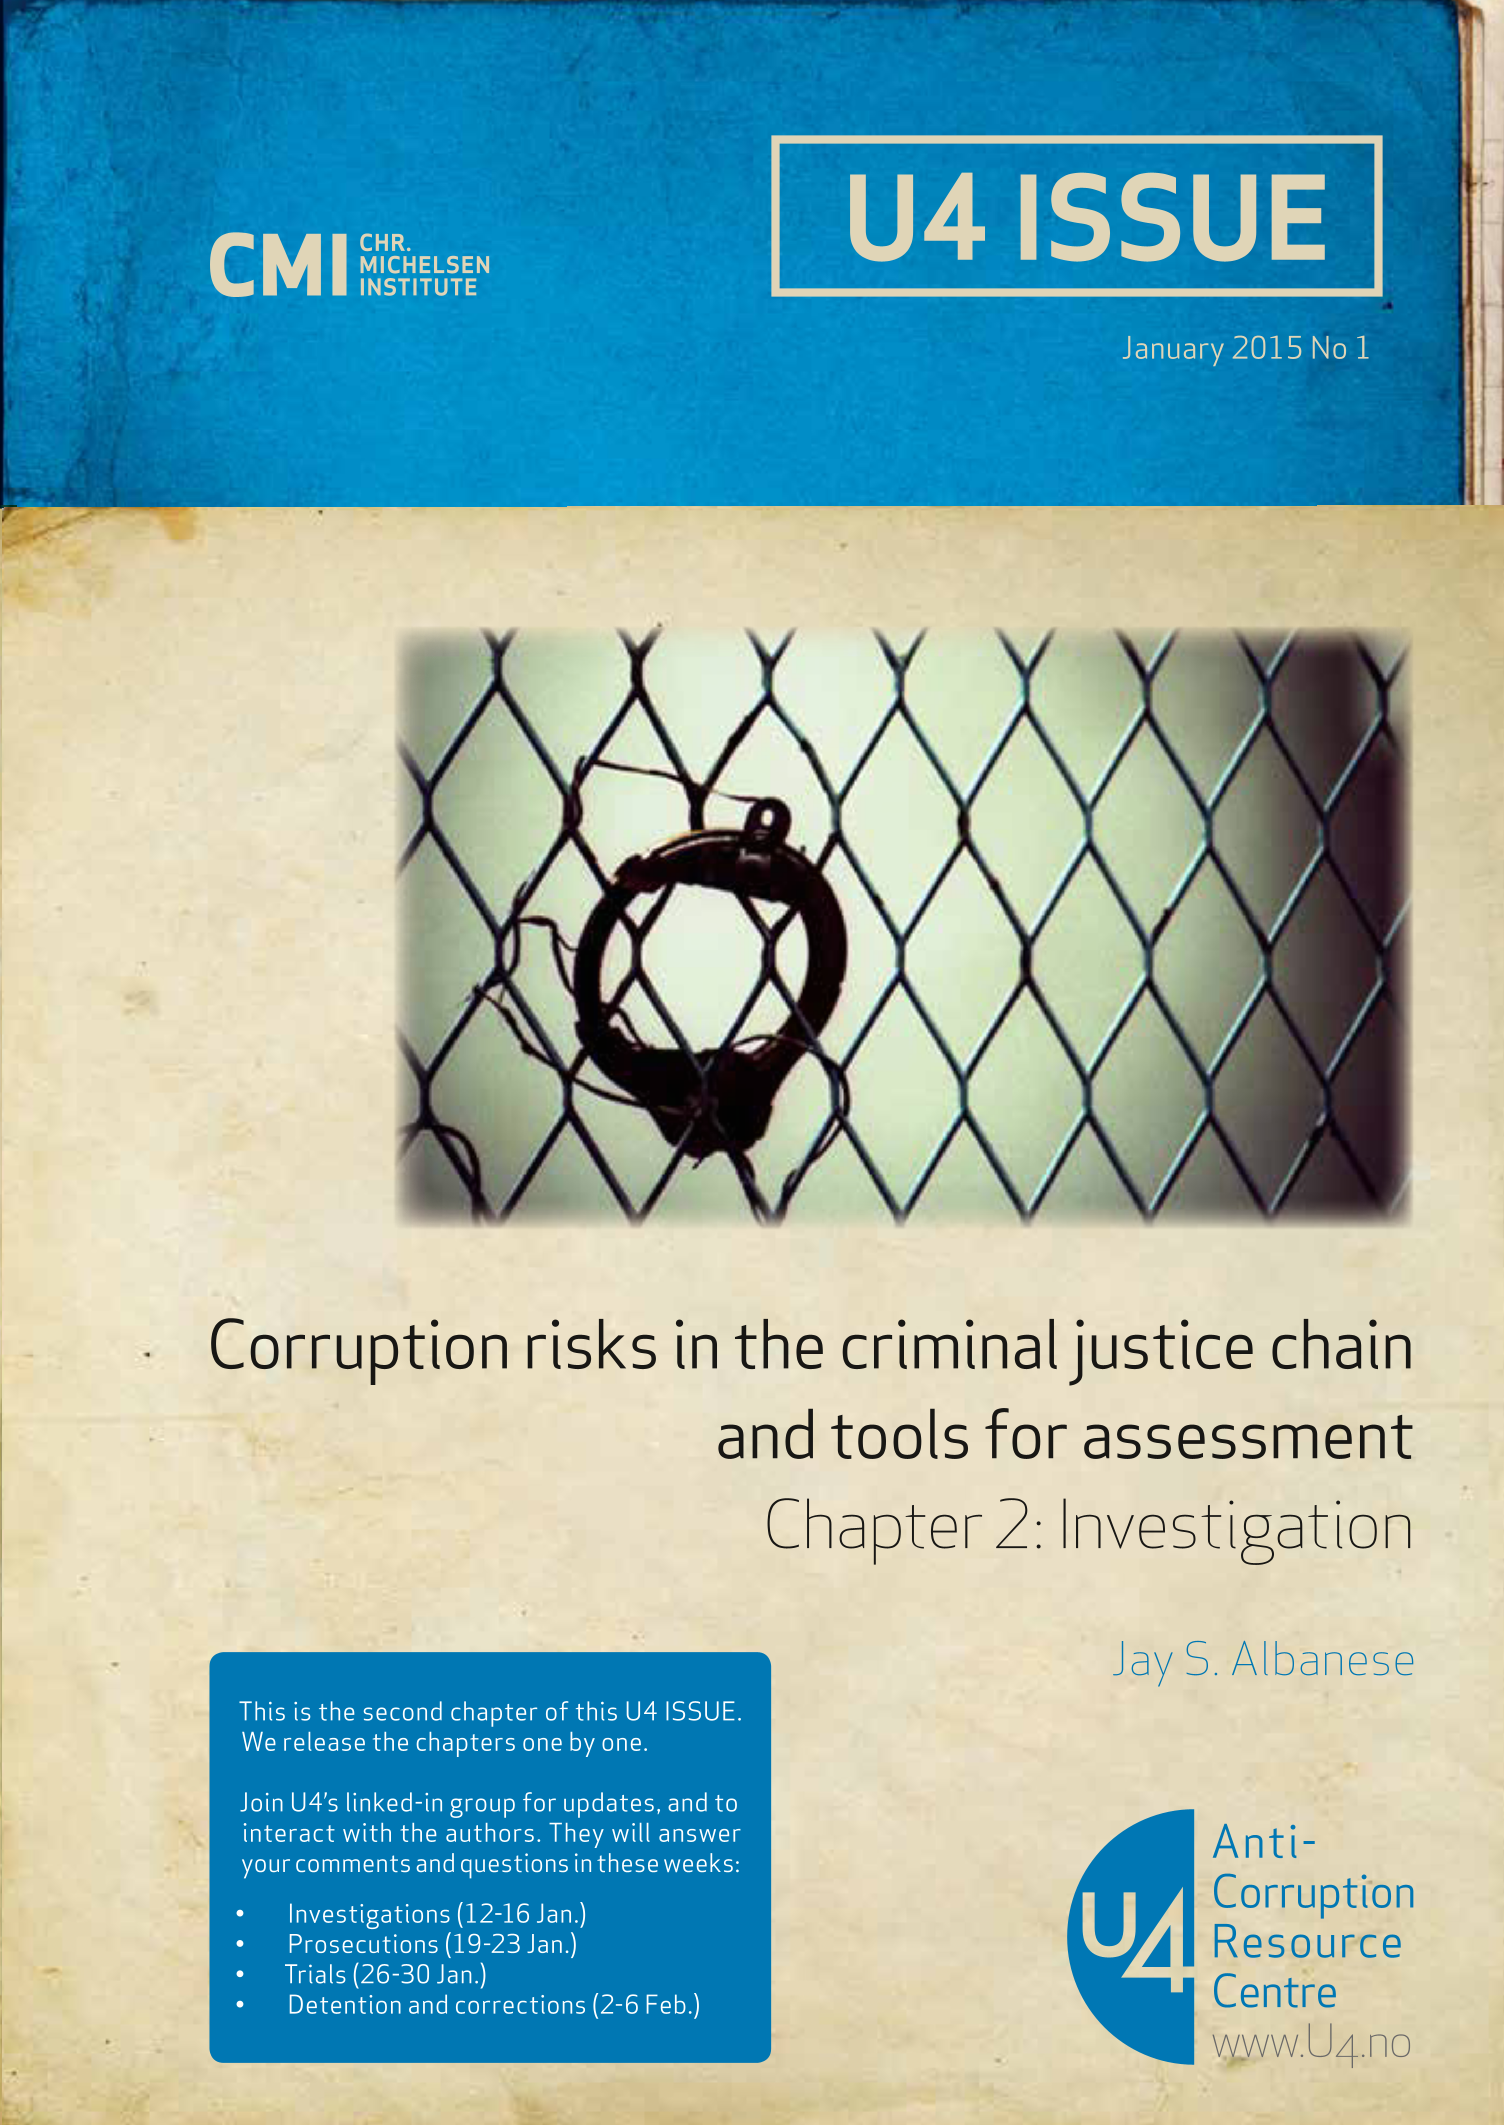 Corruption risks in the criminal justice chain and tools for assessment. Chapter 2: Investigation